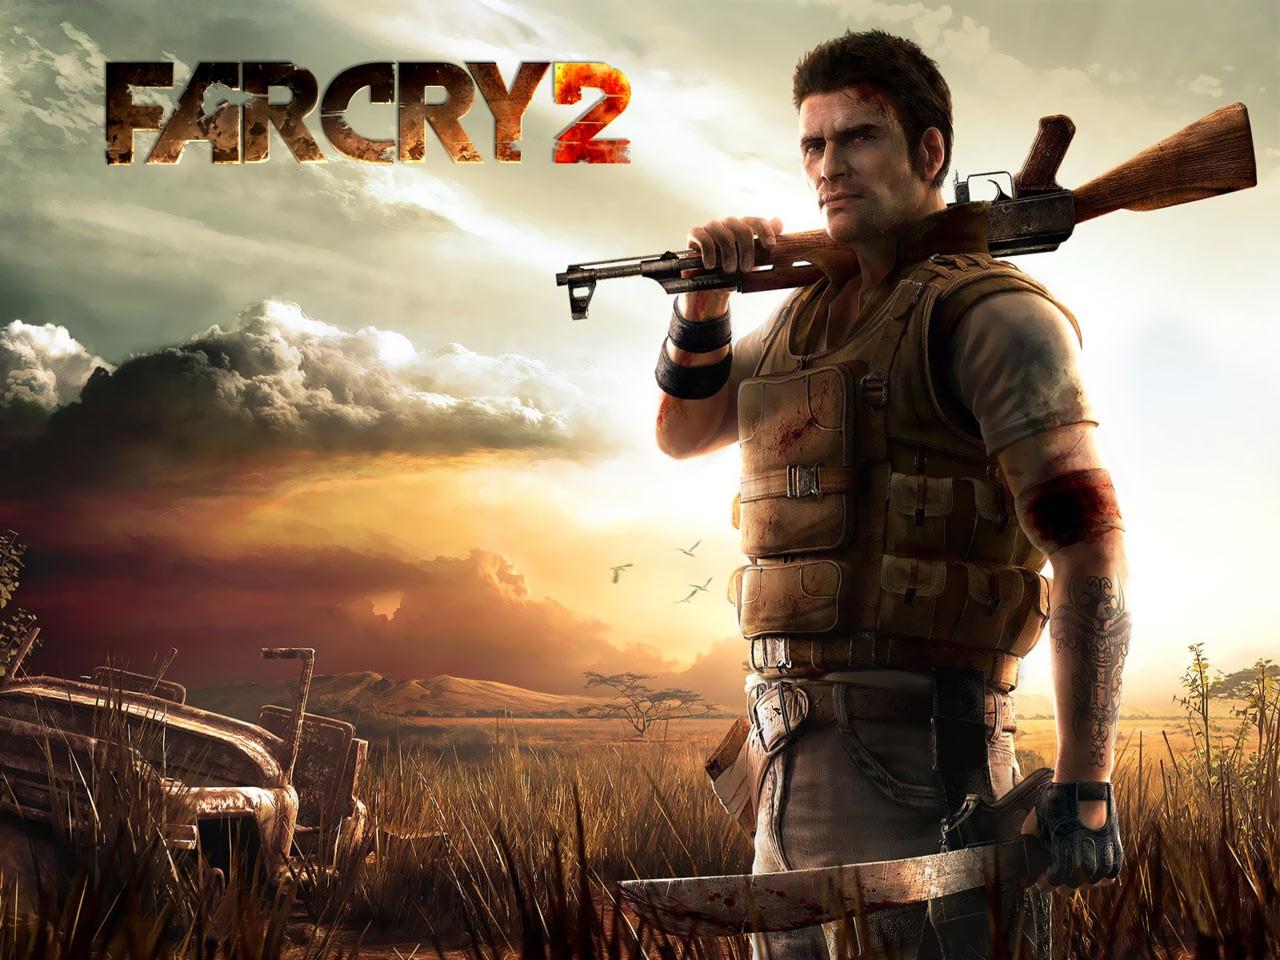 Review: Far Cry 2 Review - This Is My Joystick!